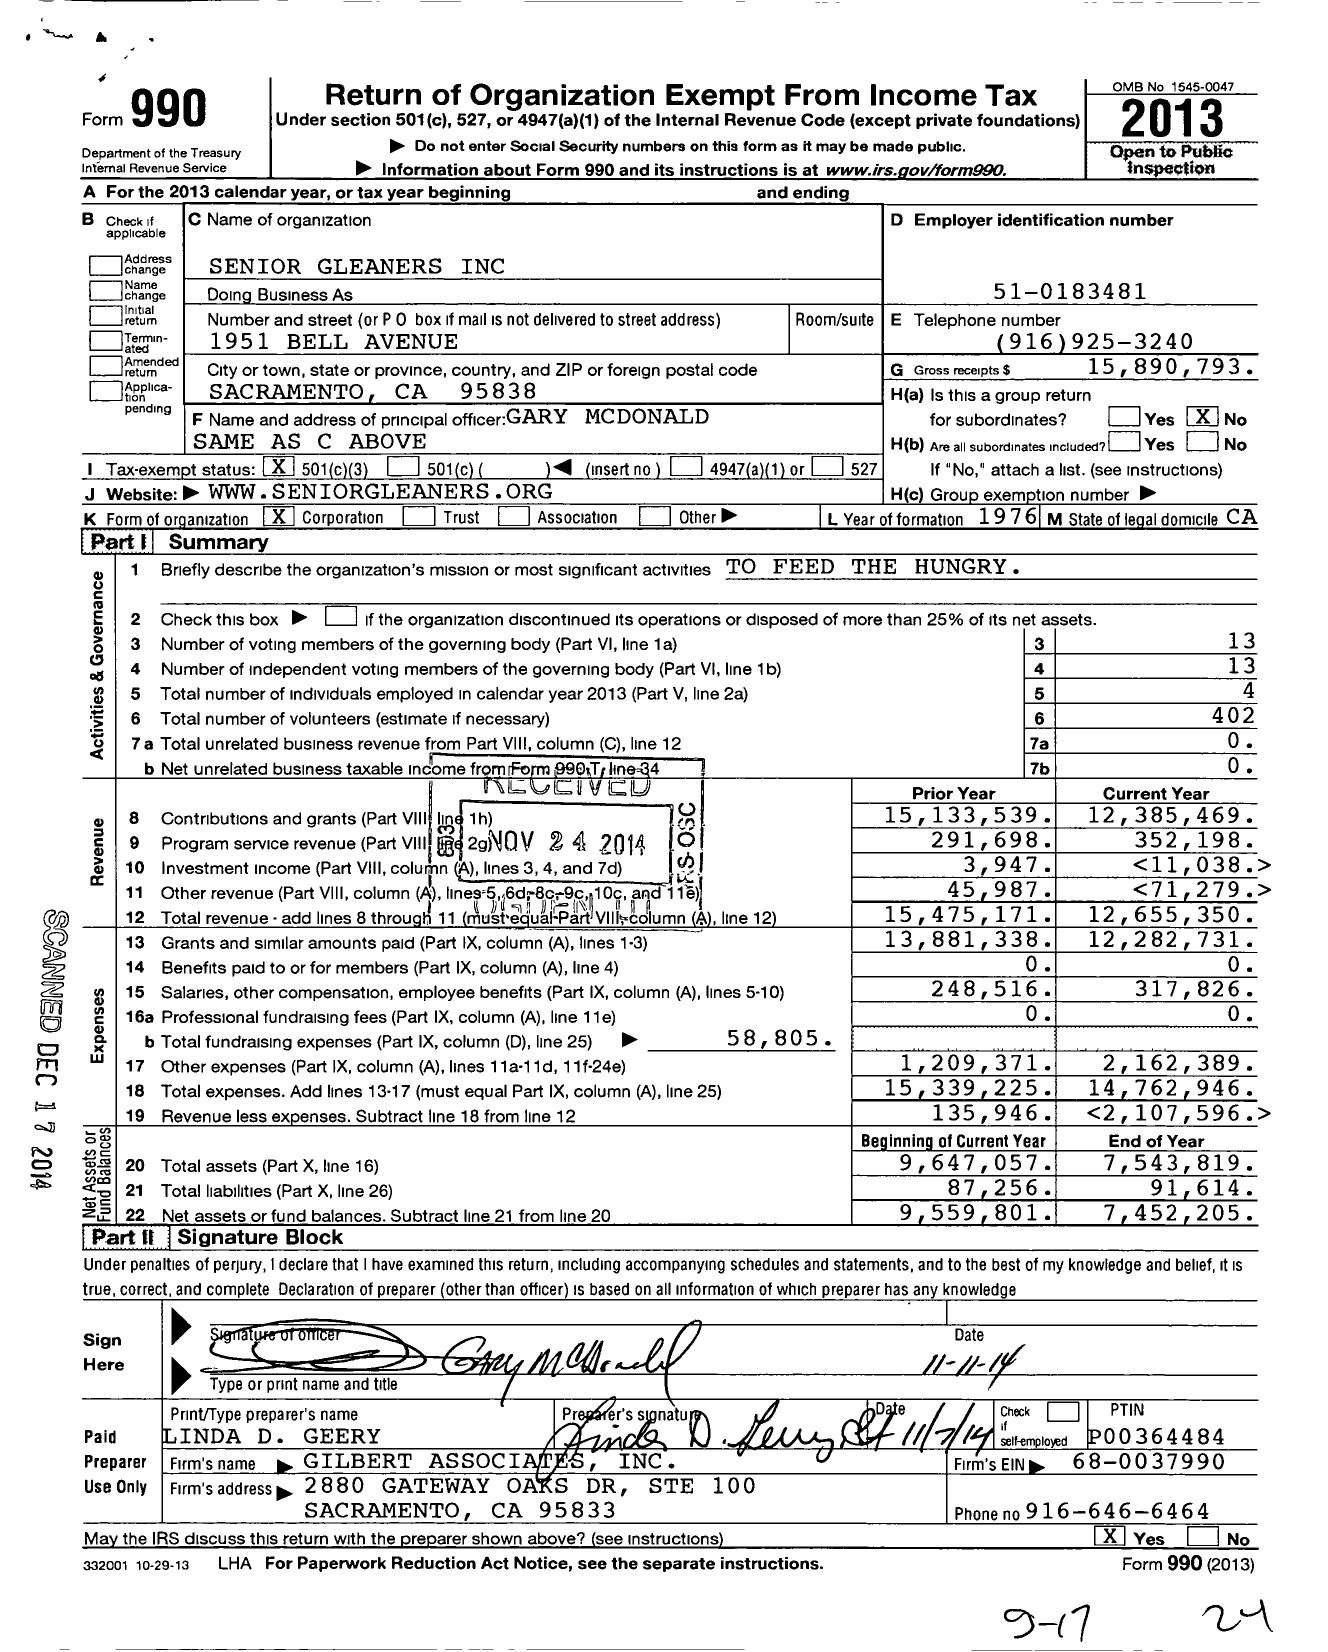 Image of first page of 2013 Form 990 for Senior Gleaners